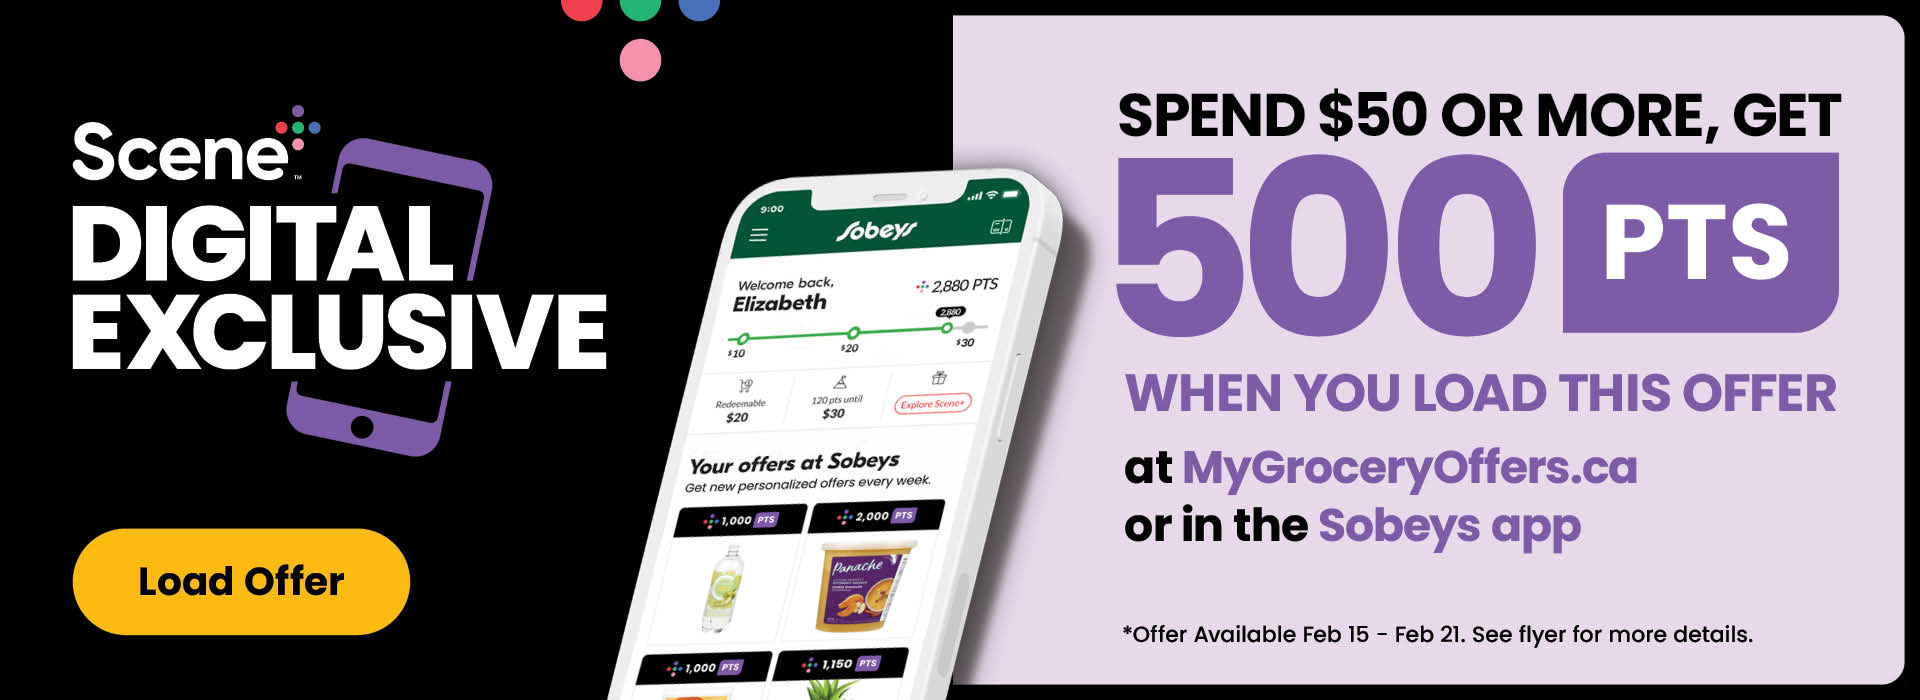 Scene+ Digital Exclusive! Load It to Get It! Spend $50 or more, get 500 PTS when you load this offer at MyGroceryOffers.ca or in the Sobeys App. See flyer for more details